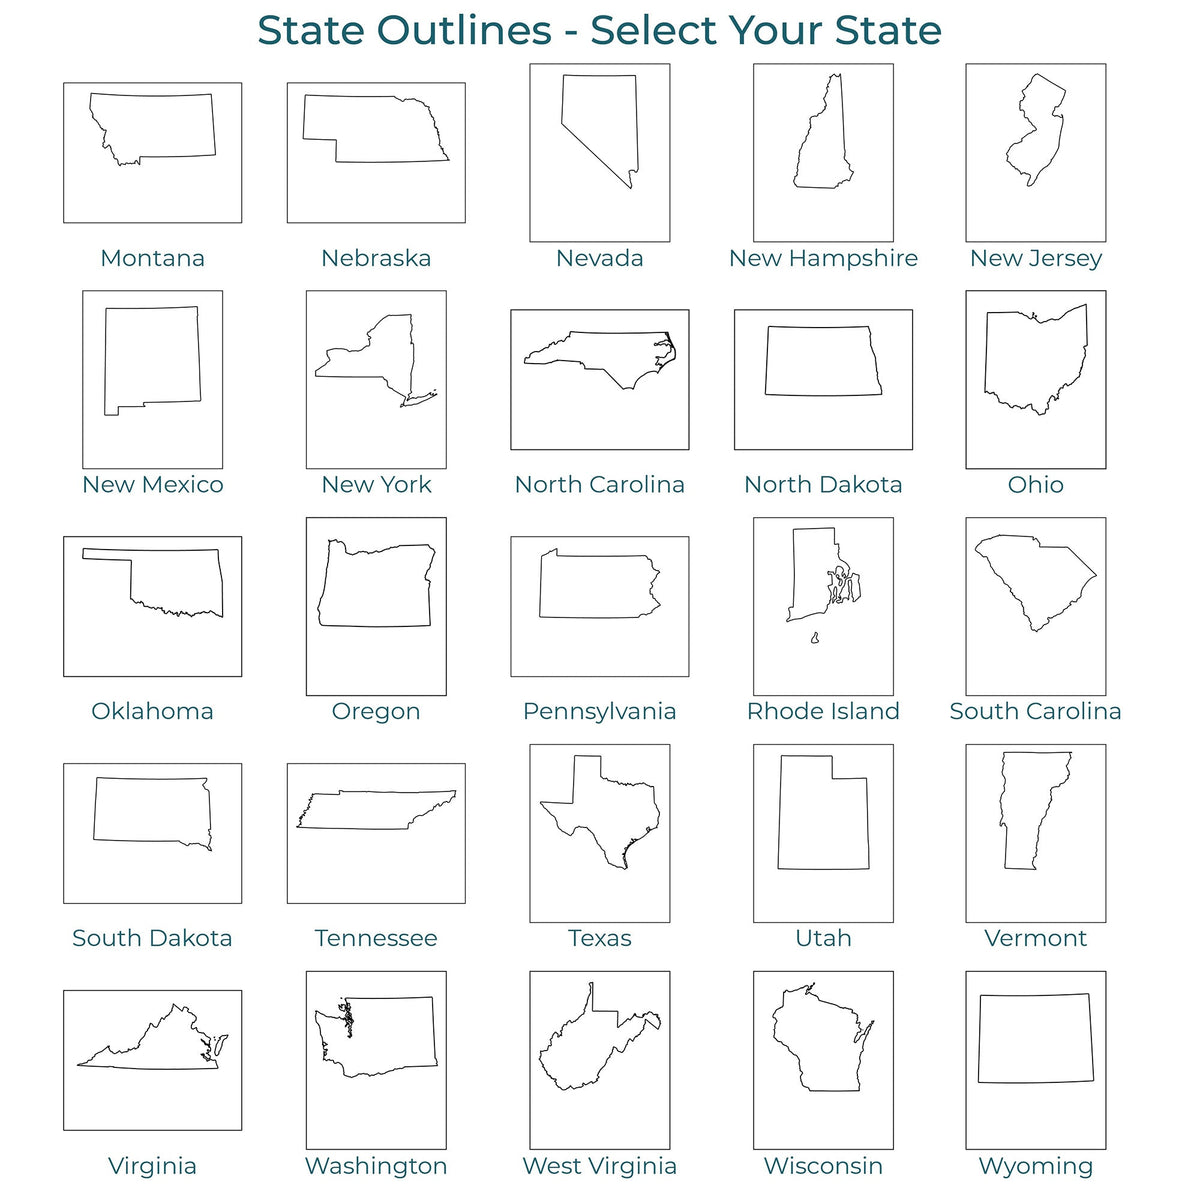 State Outline Layouts 2